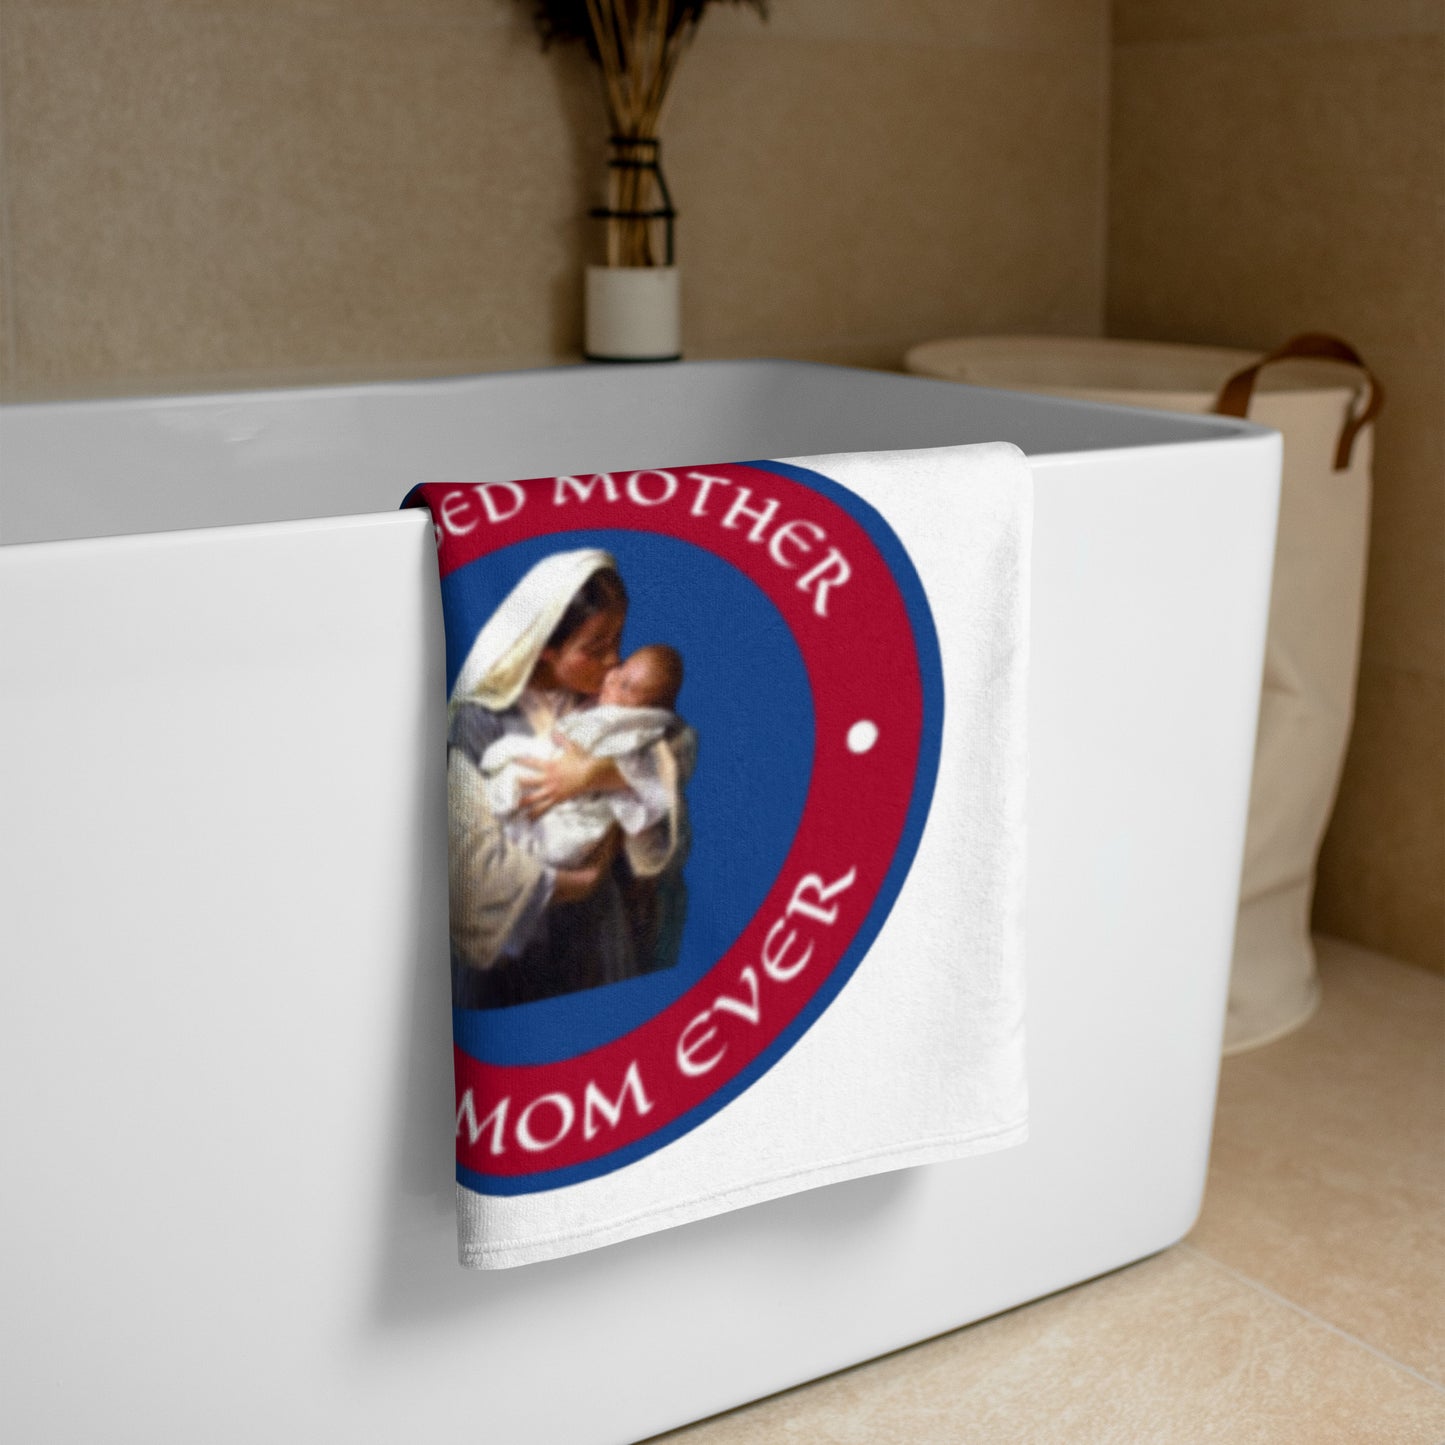 Blessed Mother Towel